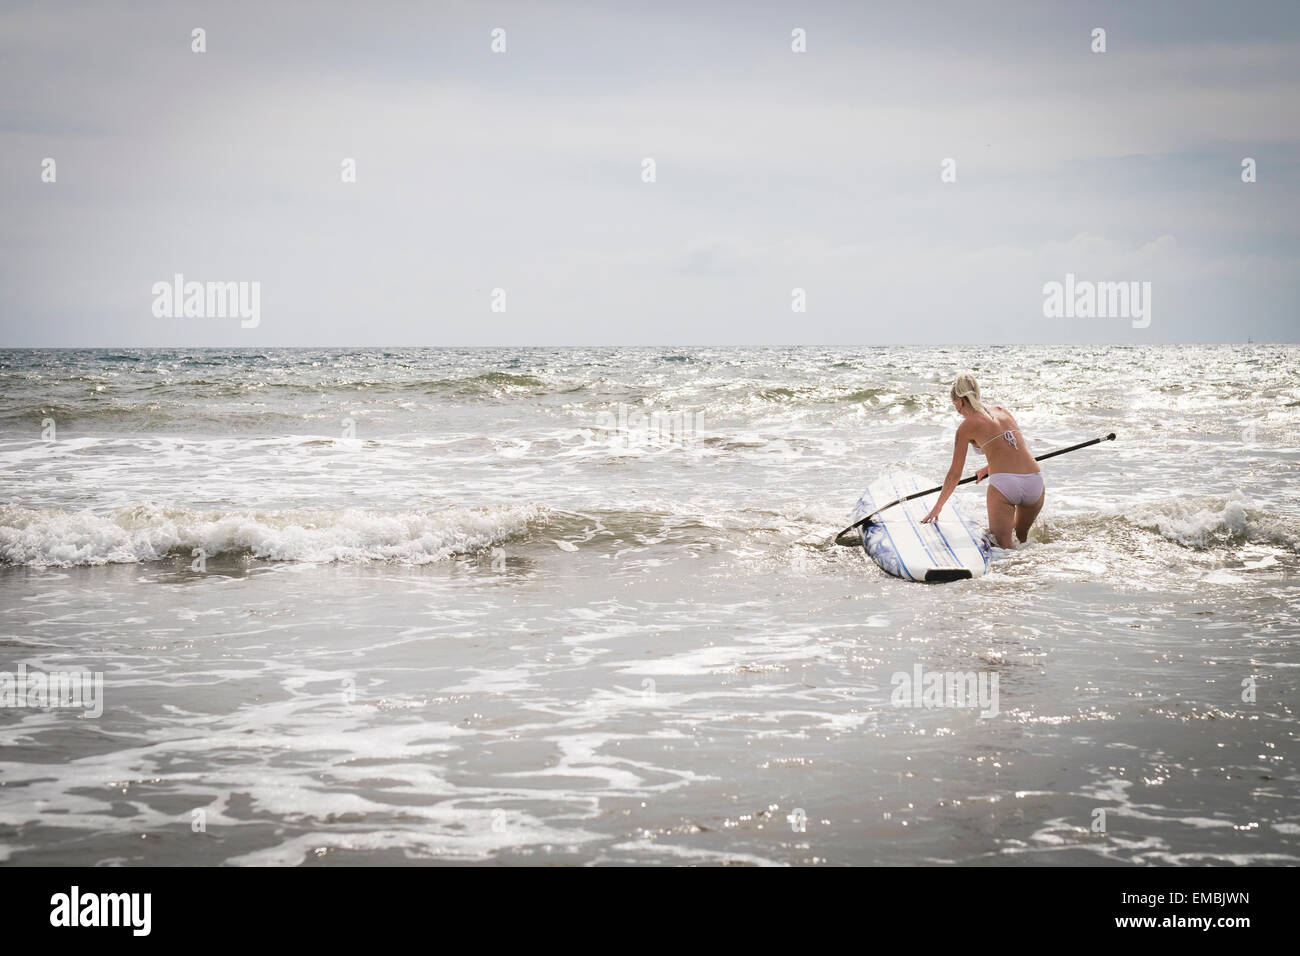 Young woman in the surf of a beach with paddle board, Riviera Nayarit, Pacific Coast, Mexico Stock Photo